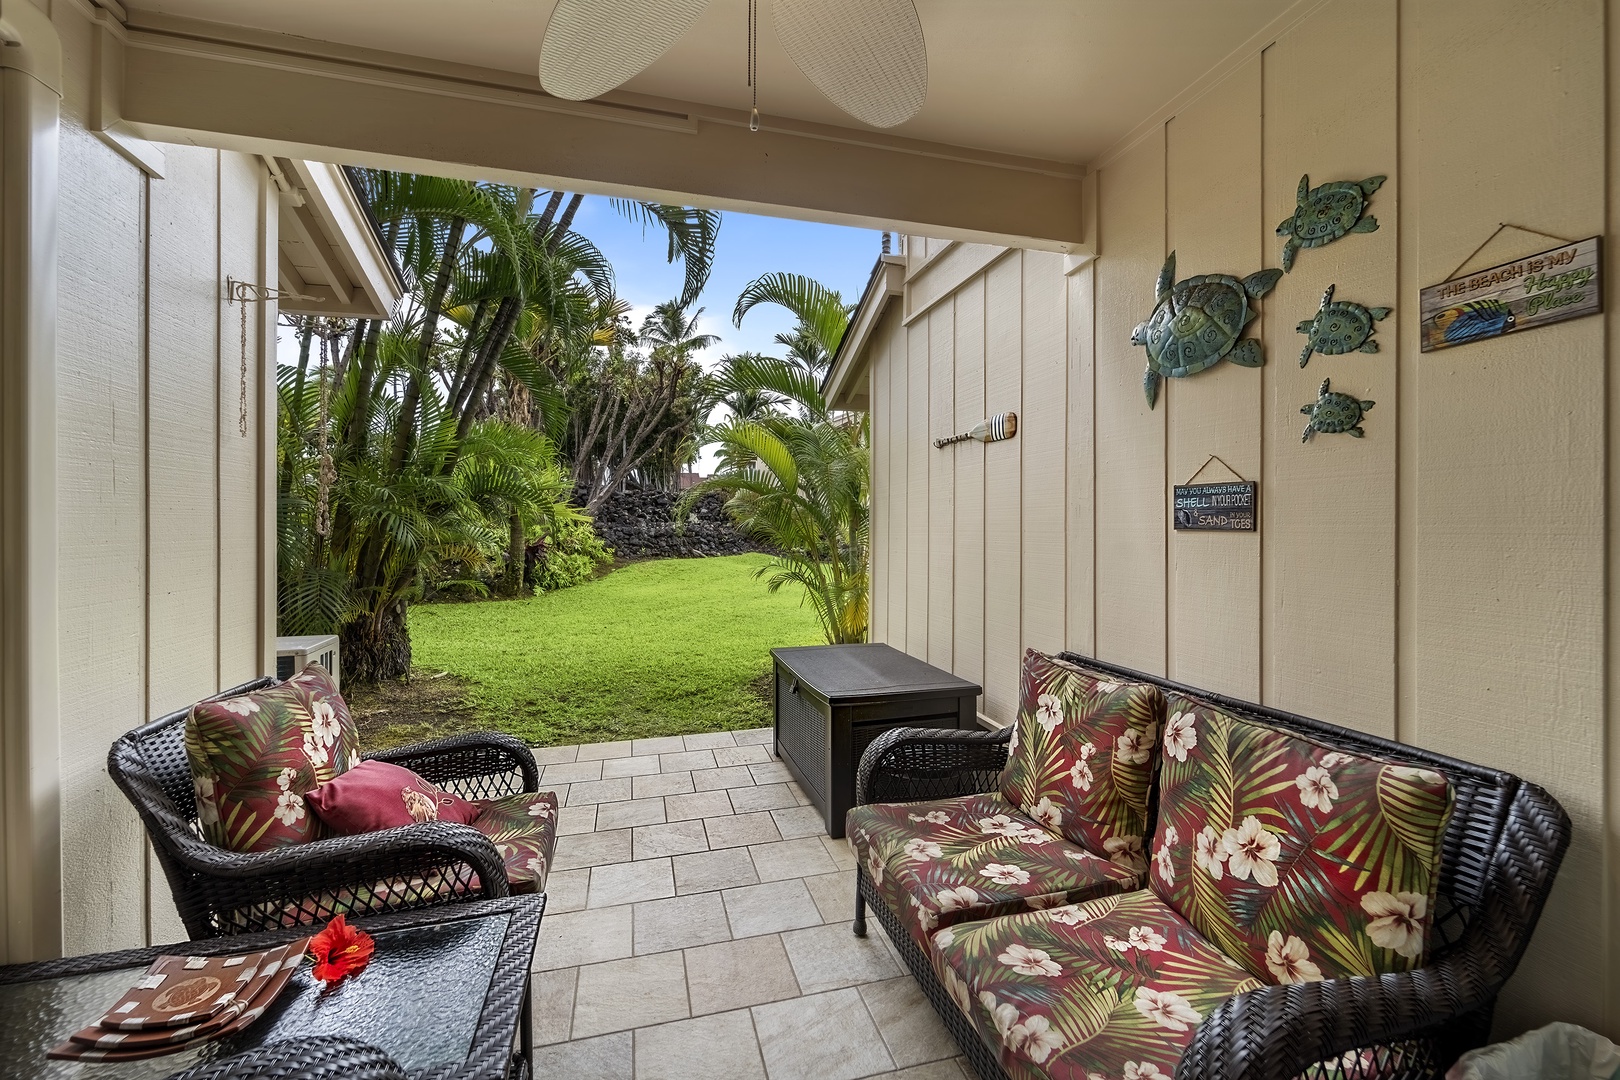 Kailua Kona Vacation Rentals, Keauhou Kona Surf & Racquet #48 - Common area out in front of the condo where you can go for your morning walk!